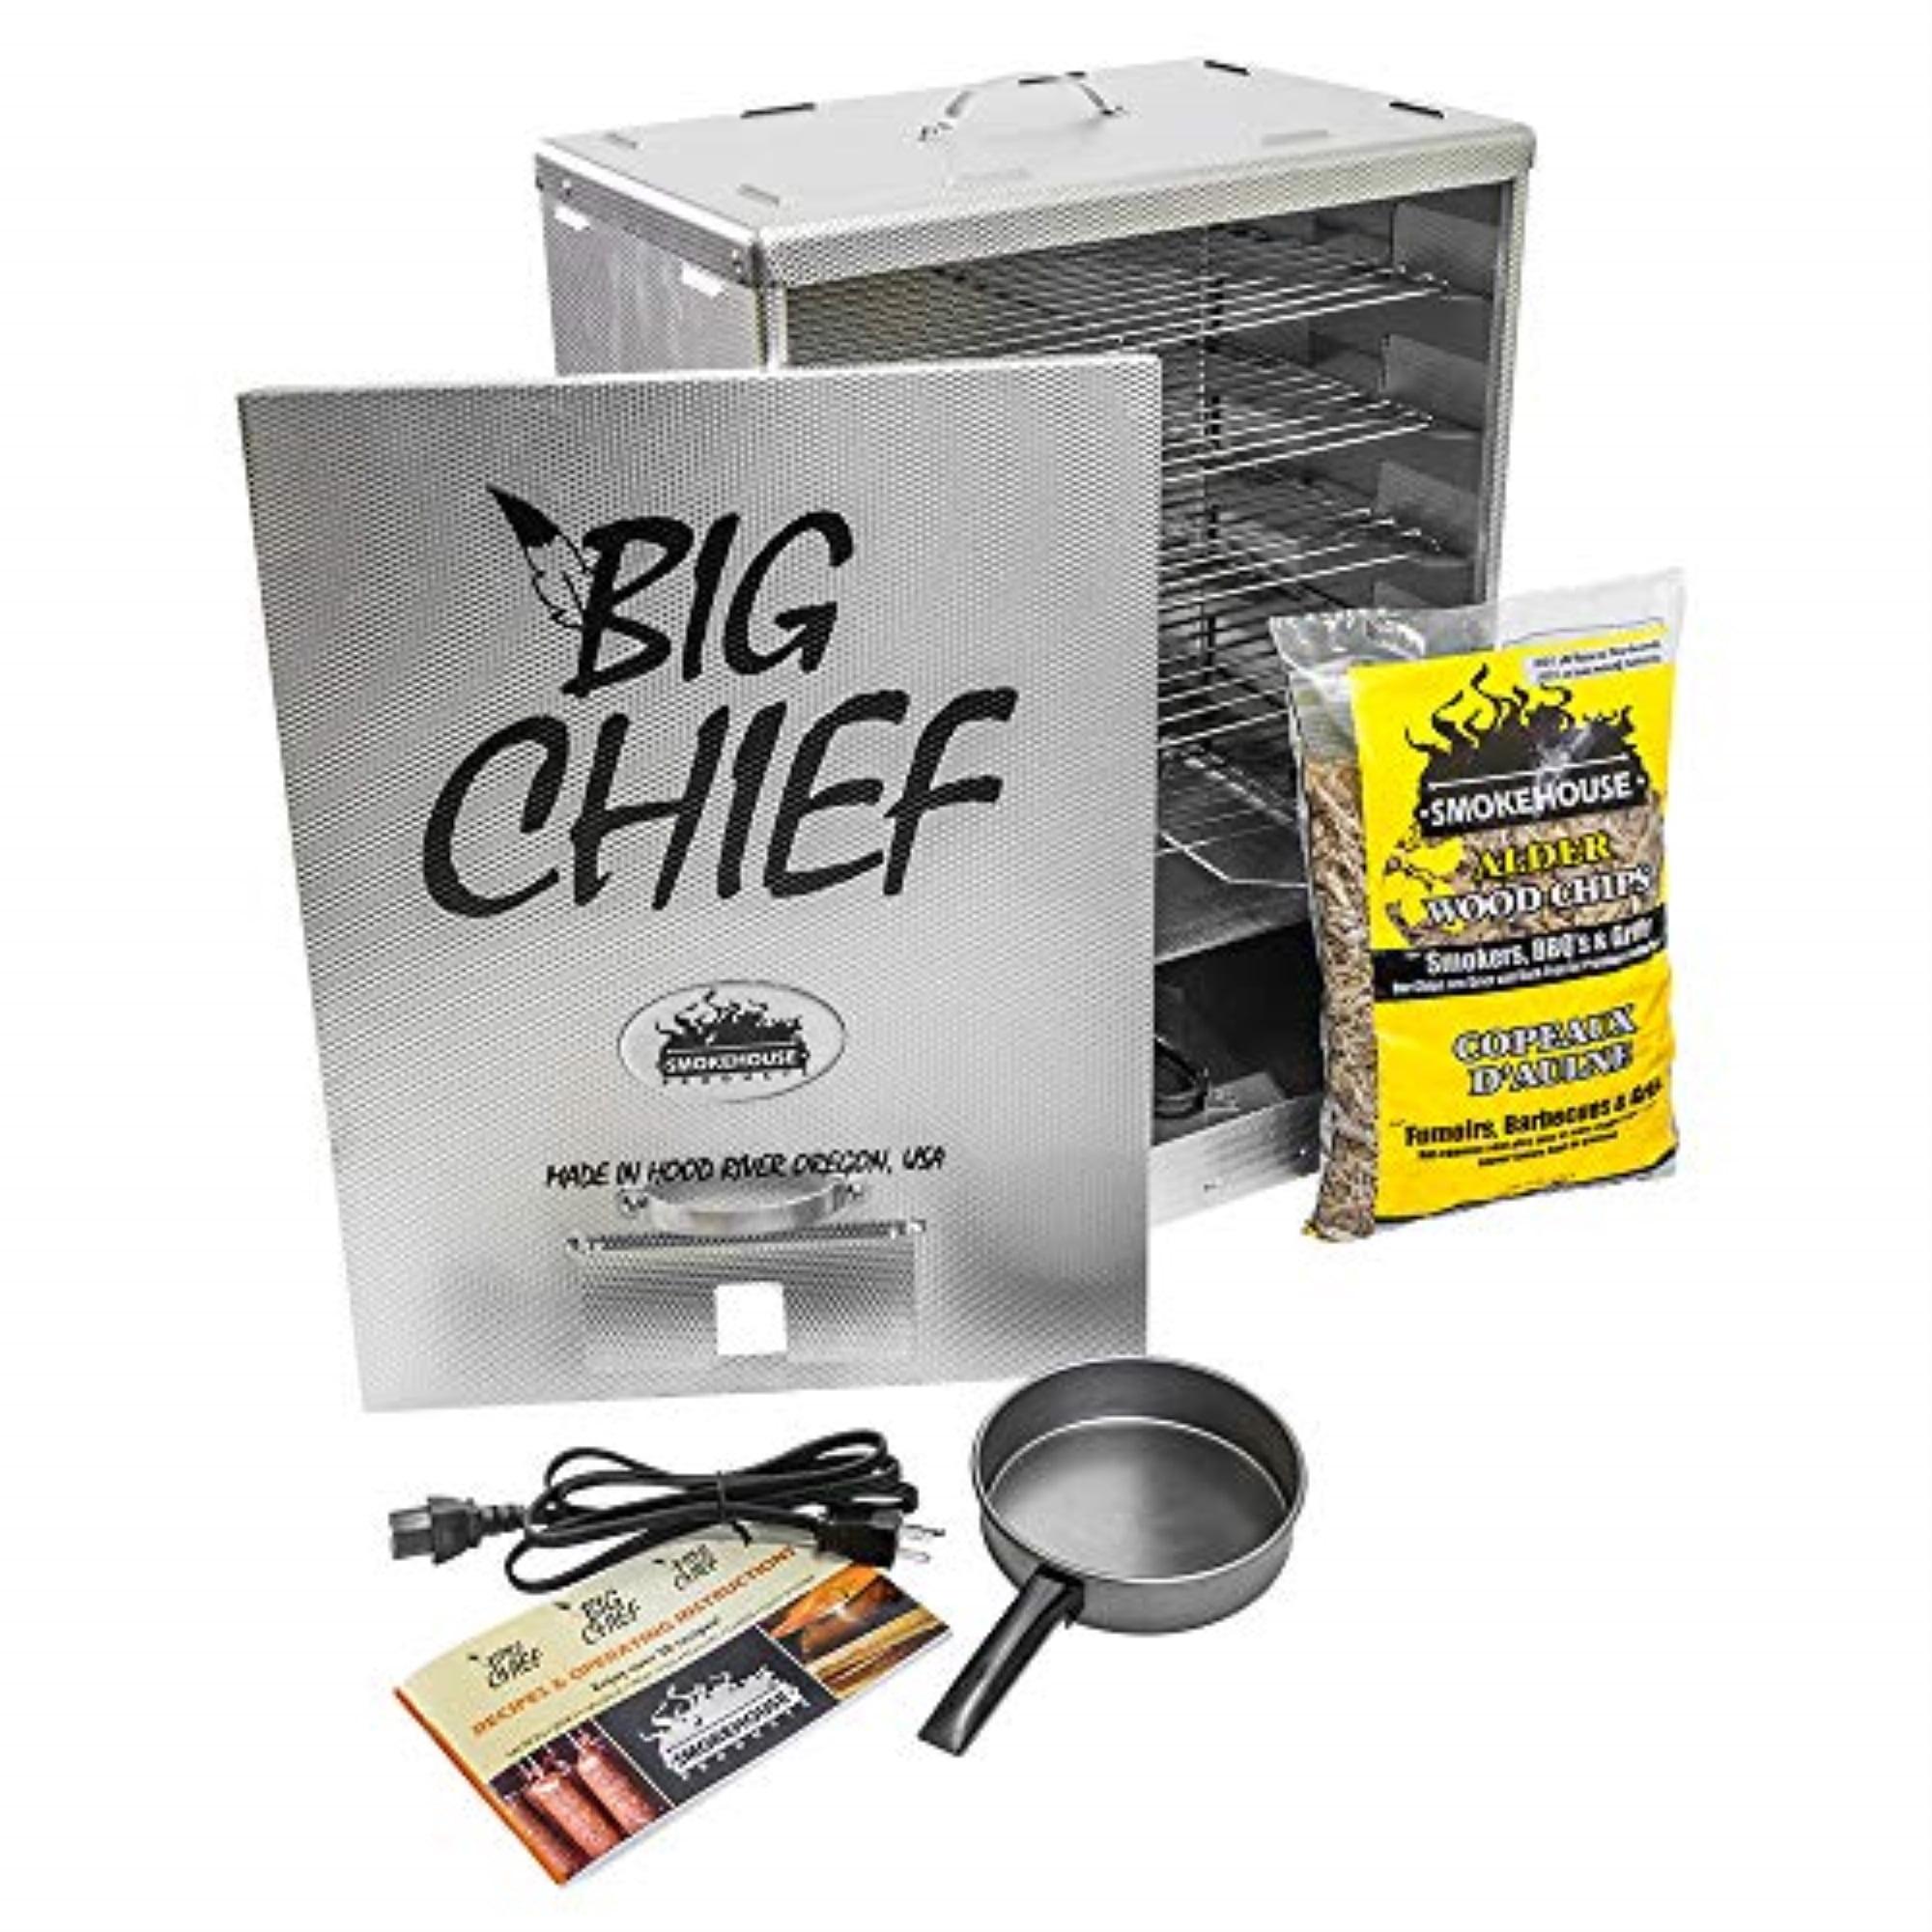 Smokehouse Big Chief 50lb Capacity Electric Outdoor Cooker in Silver